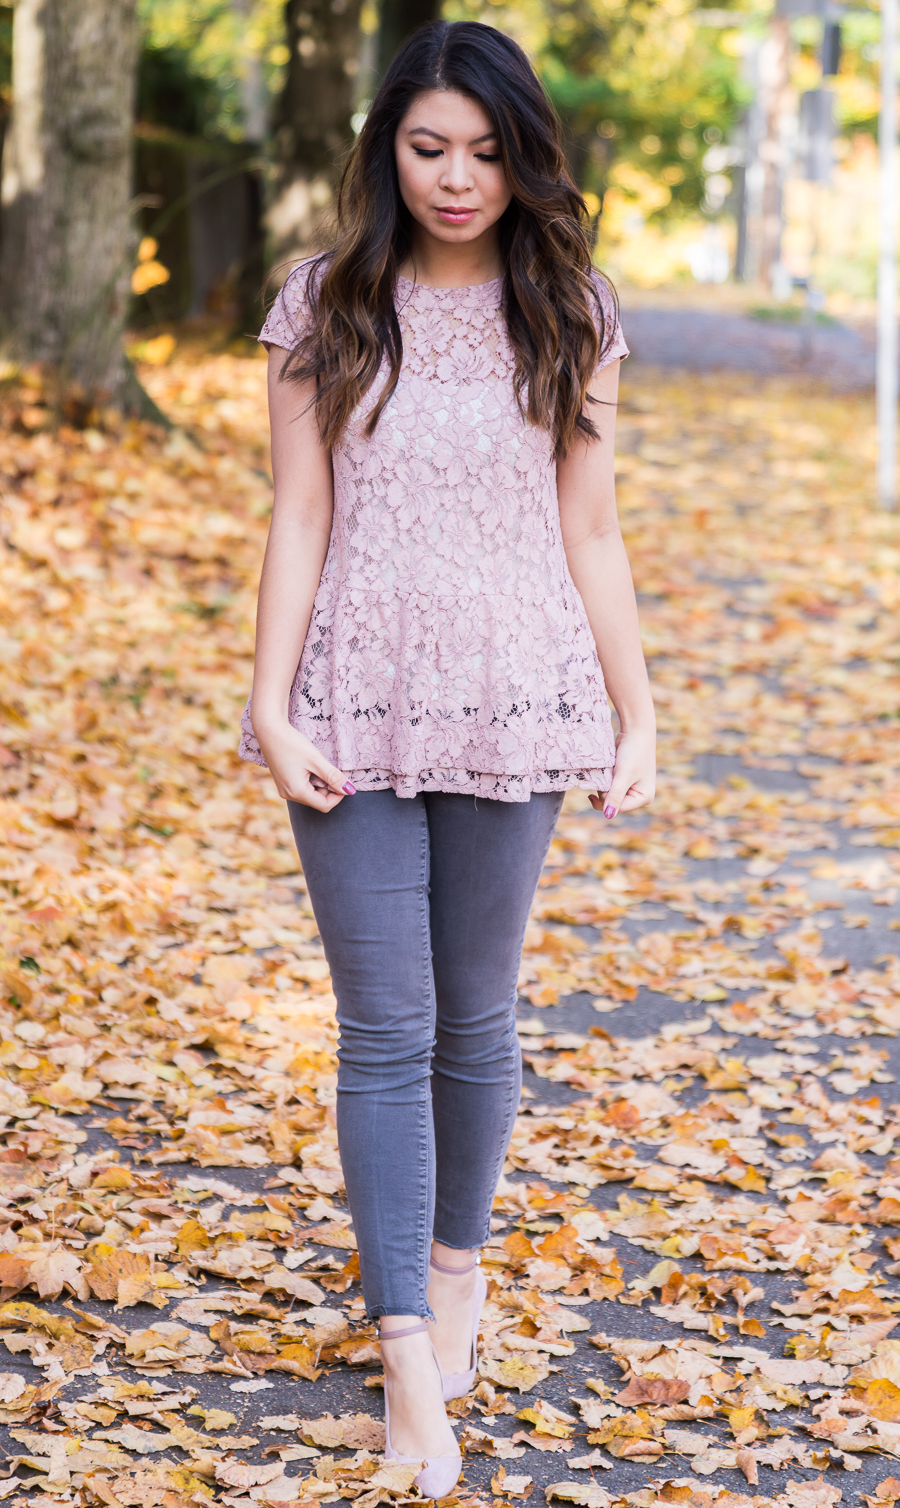 Blush lace top, peplum top, grey jeans outfit, Sam Edelman pumps, fall outfit, Seattle fashion blogger www.justatinabit.com